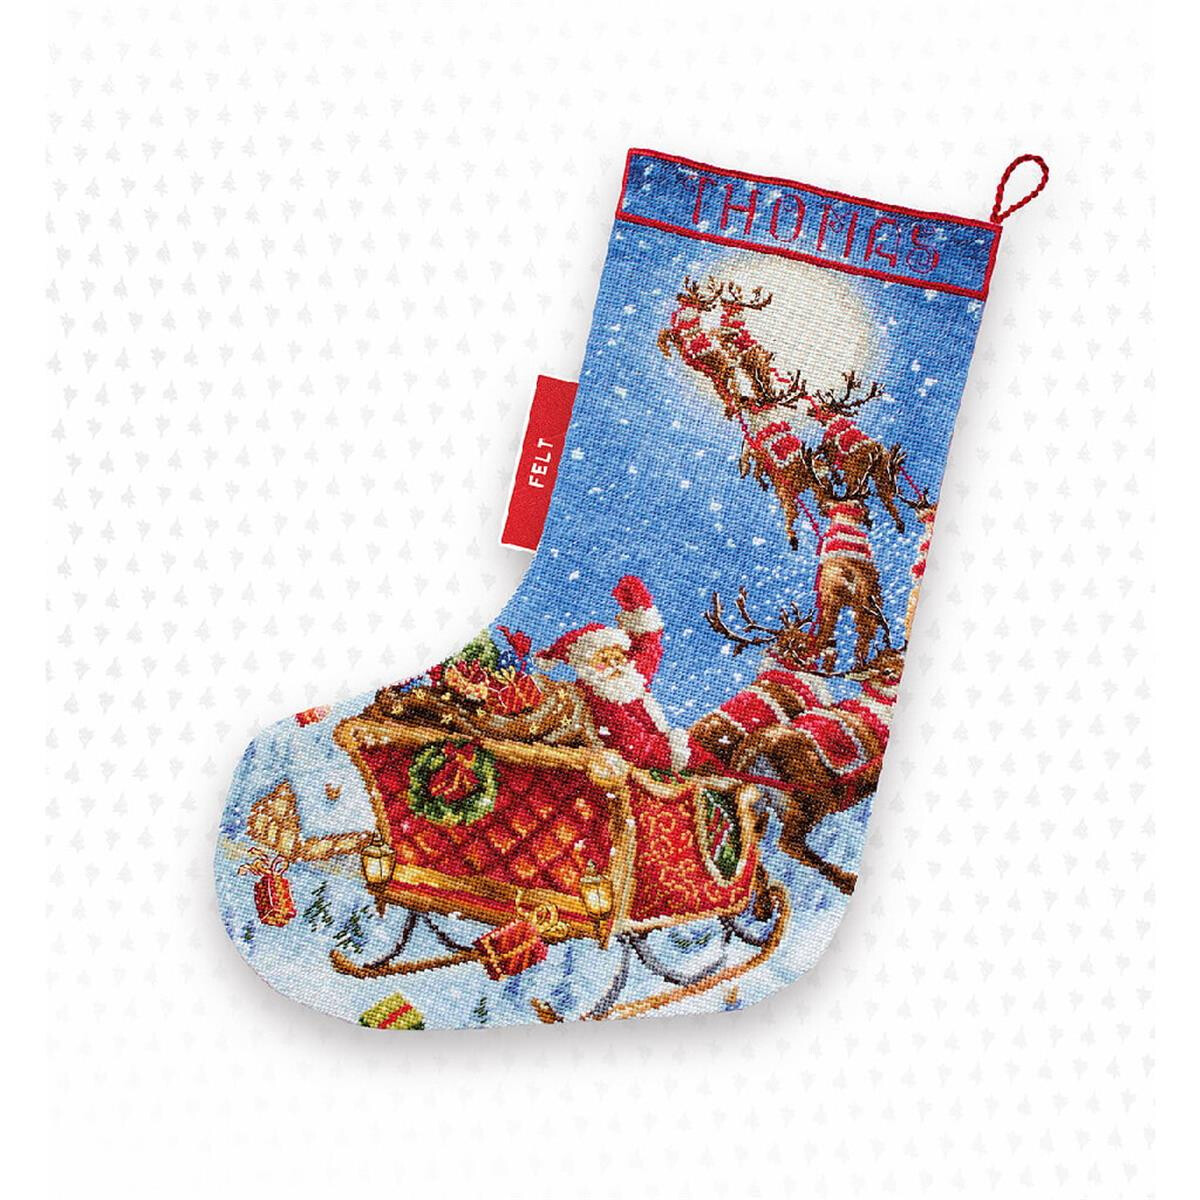 A festive Christmas stocking depicts a snowy scene with...